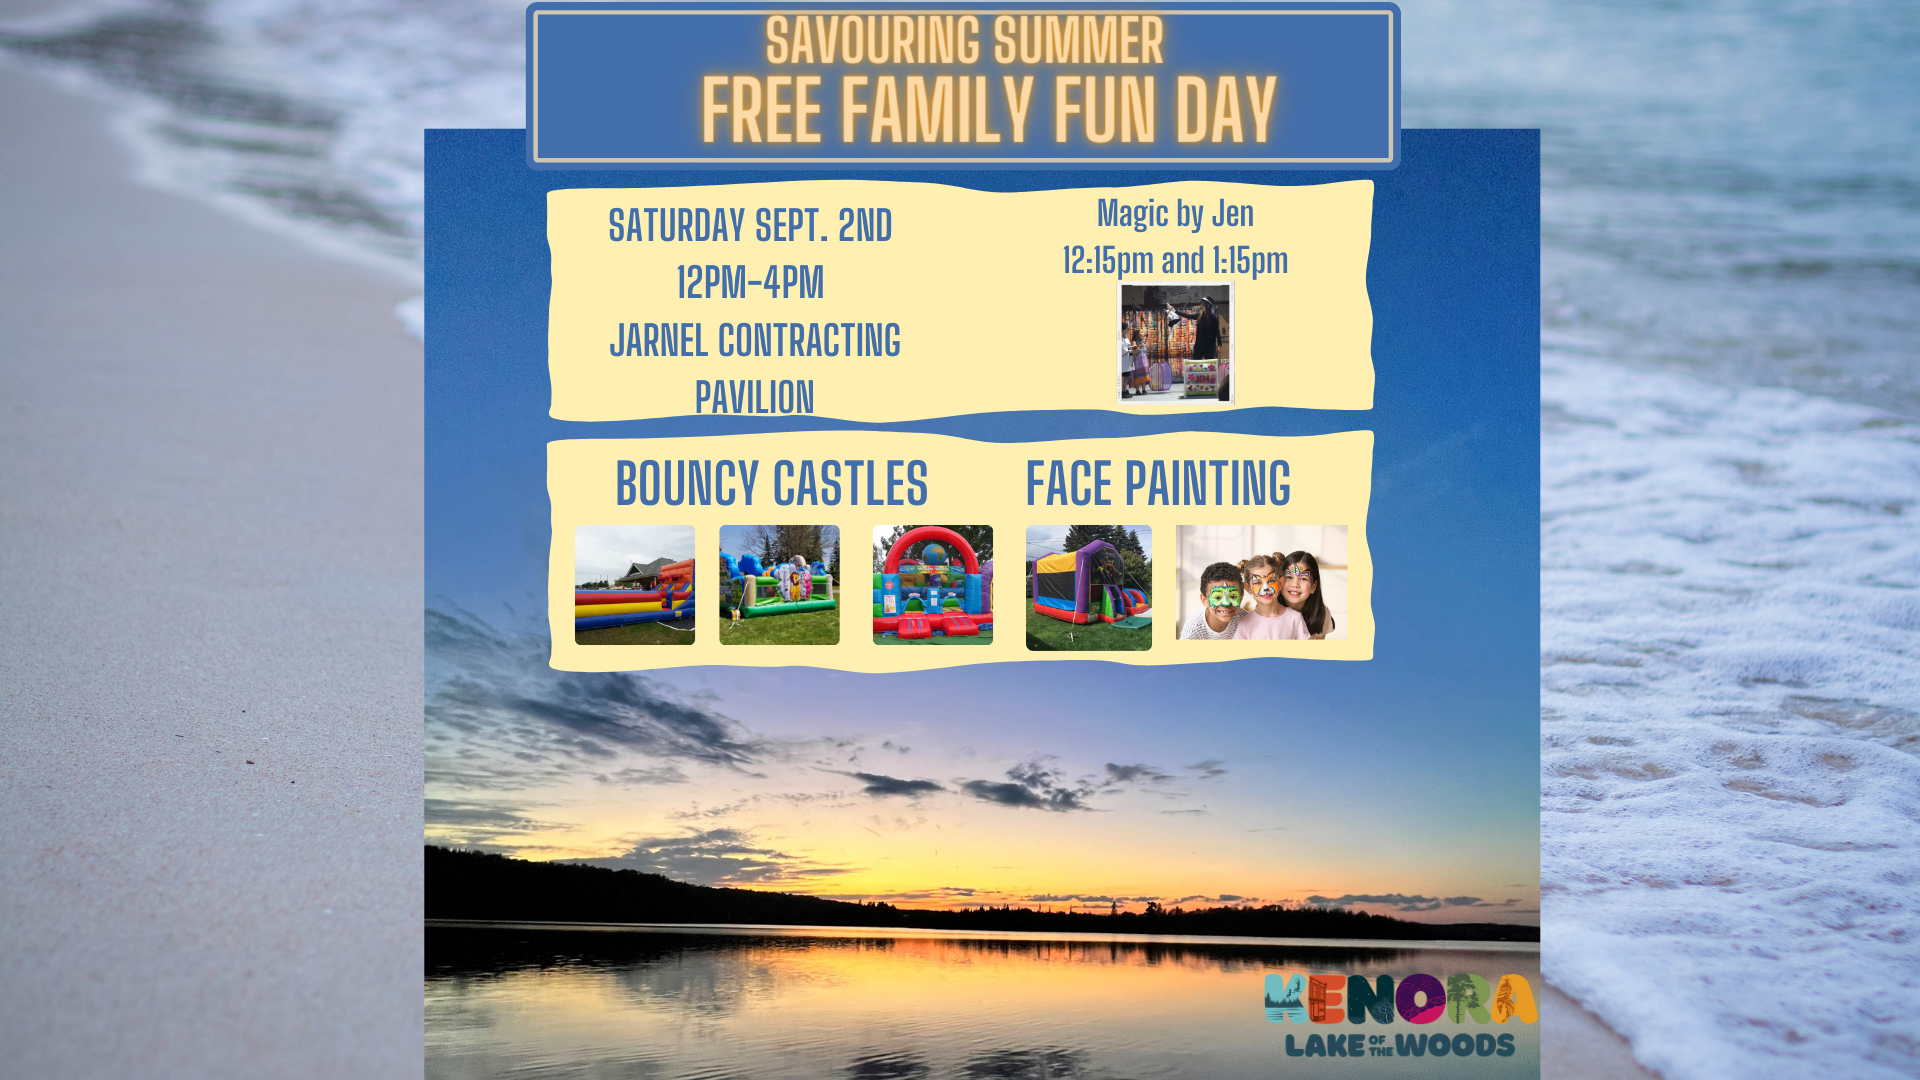 A lake background with highlighted text describing bouncy castles, face painting and a magic show. 